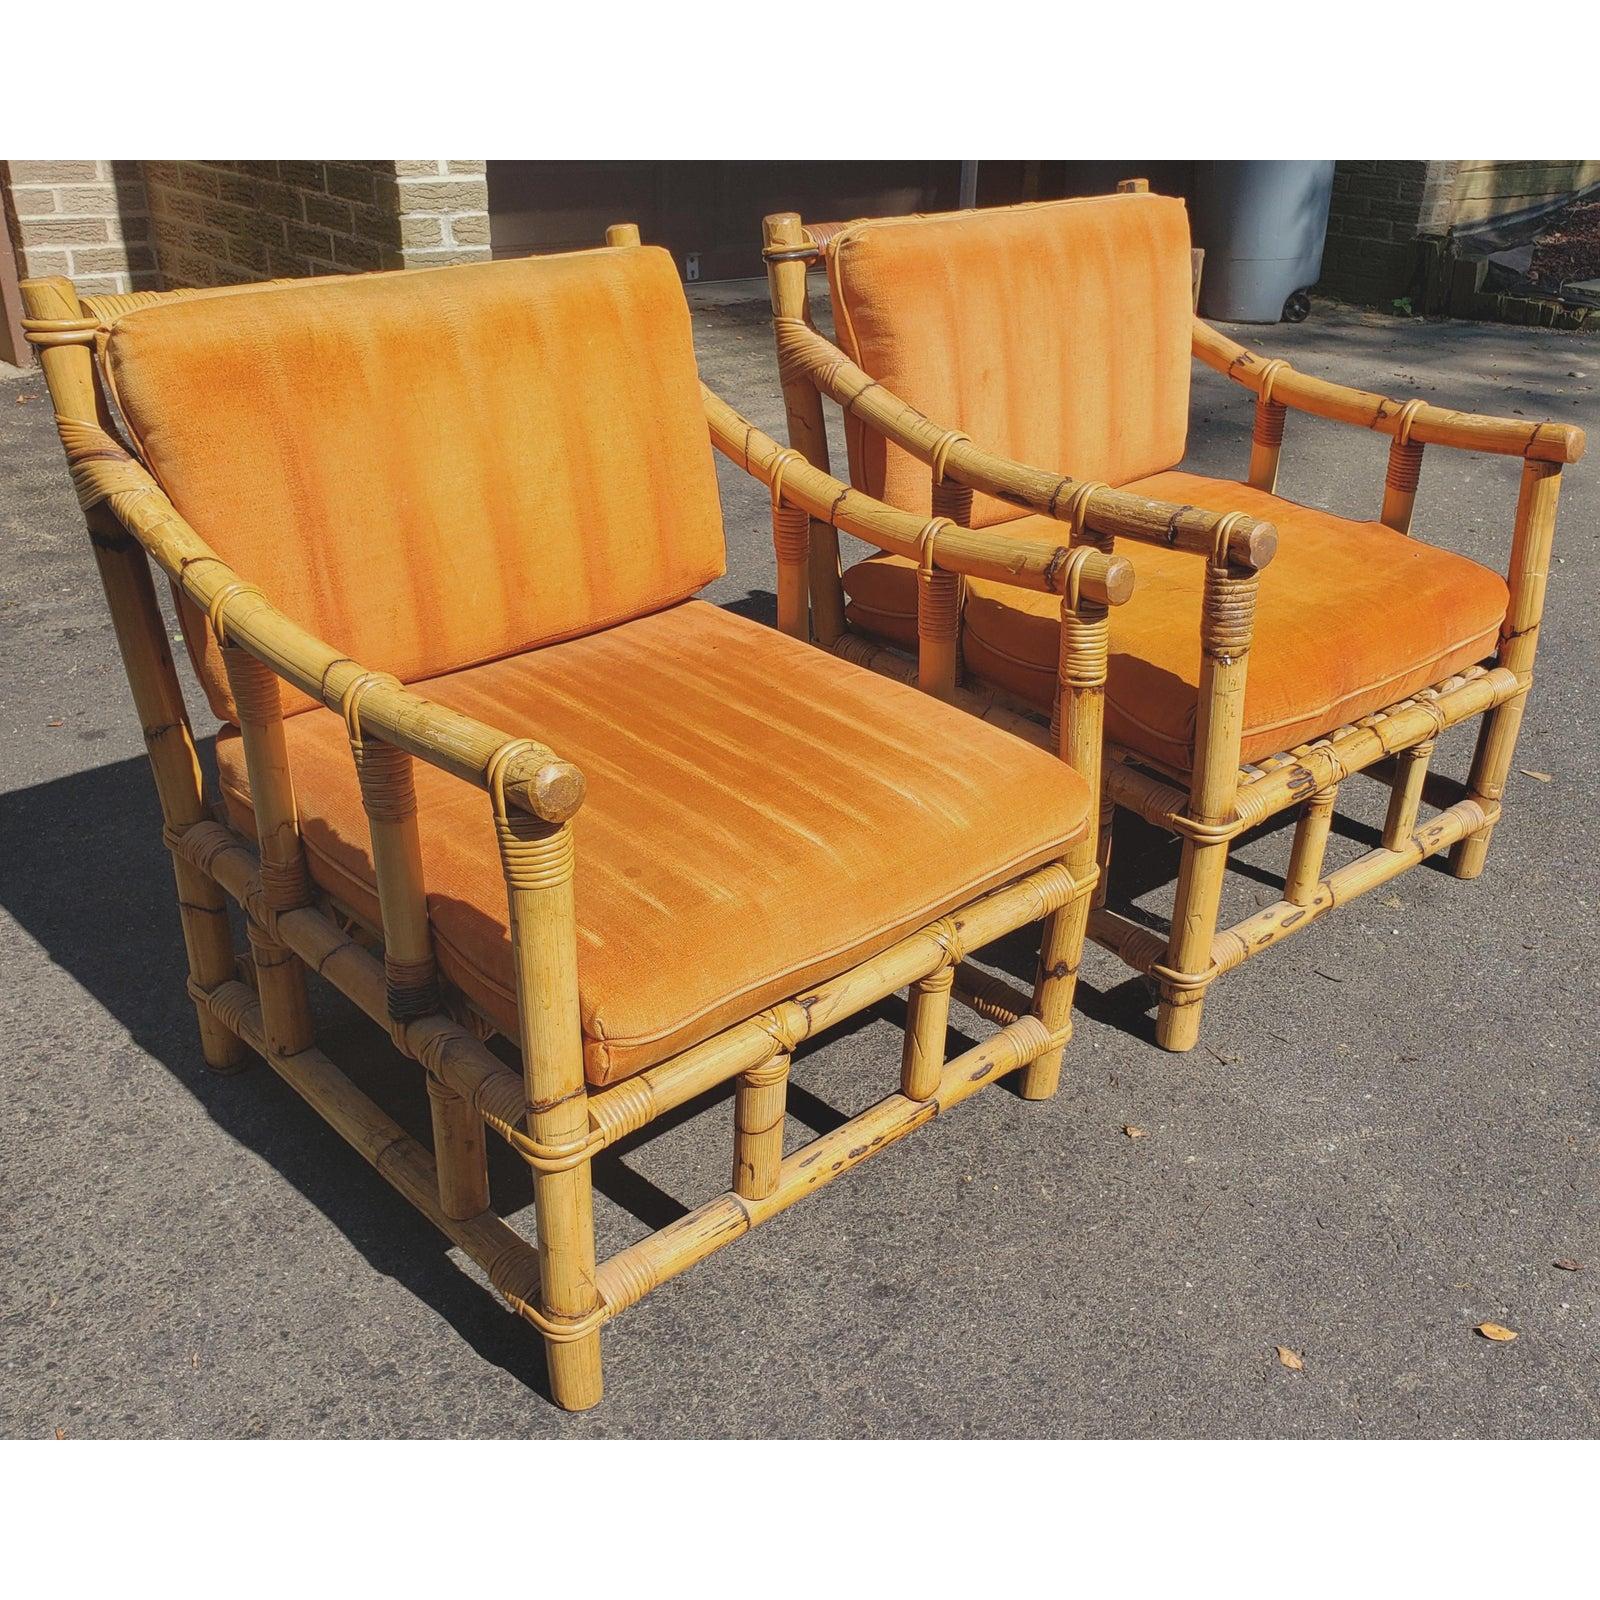 1950s jumbo bamboo lounge chair. Velvet orange fabric cushions. Some wear , fading on fabric but no tear. Chair are in great shape. Measurements are 26